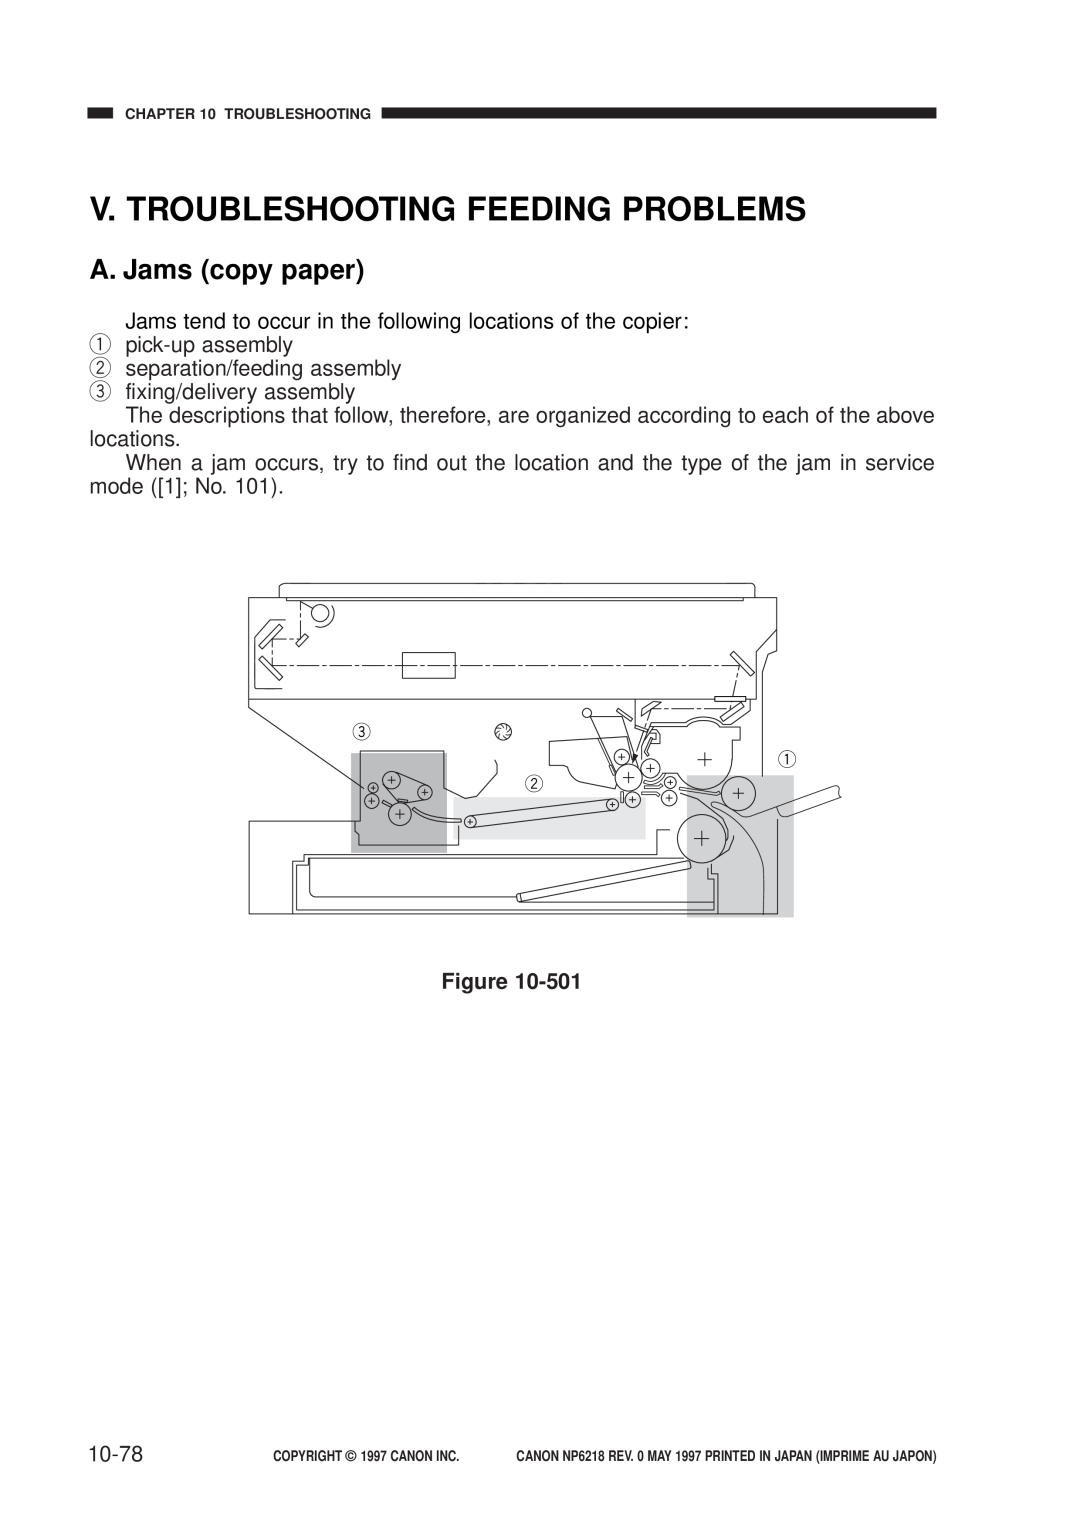 Canon NP6218, FY8-13EX-000 service manual V. Troubleshooting Feeding Problems, A. Jams copy paper, 10-78 